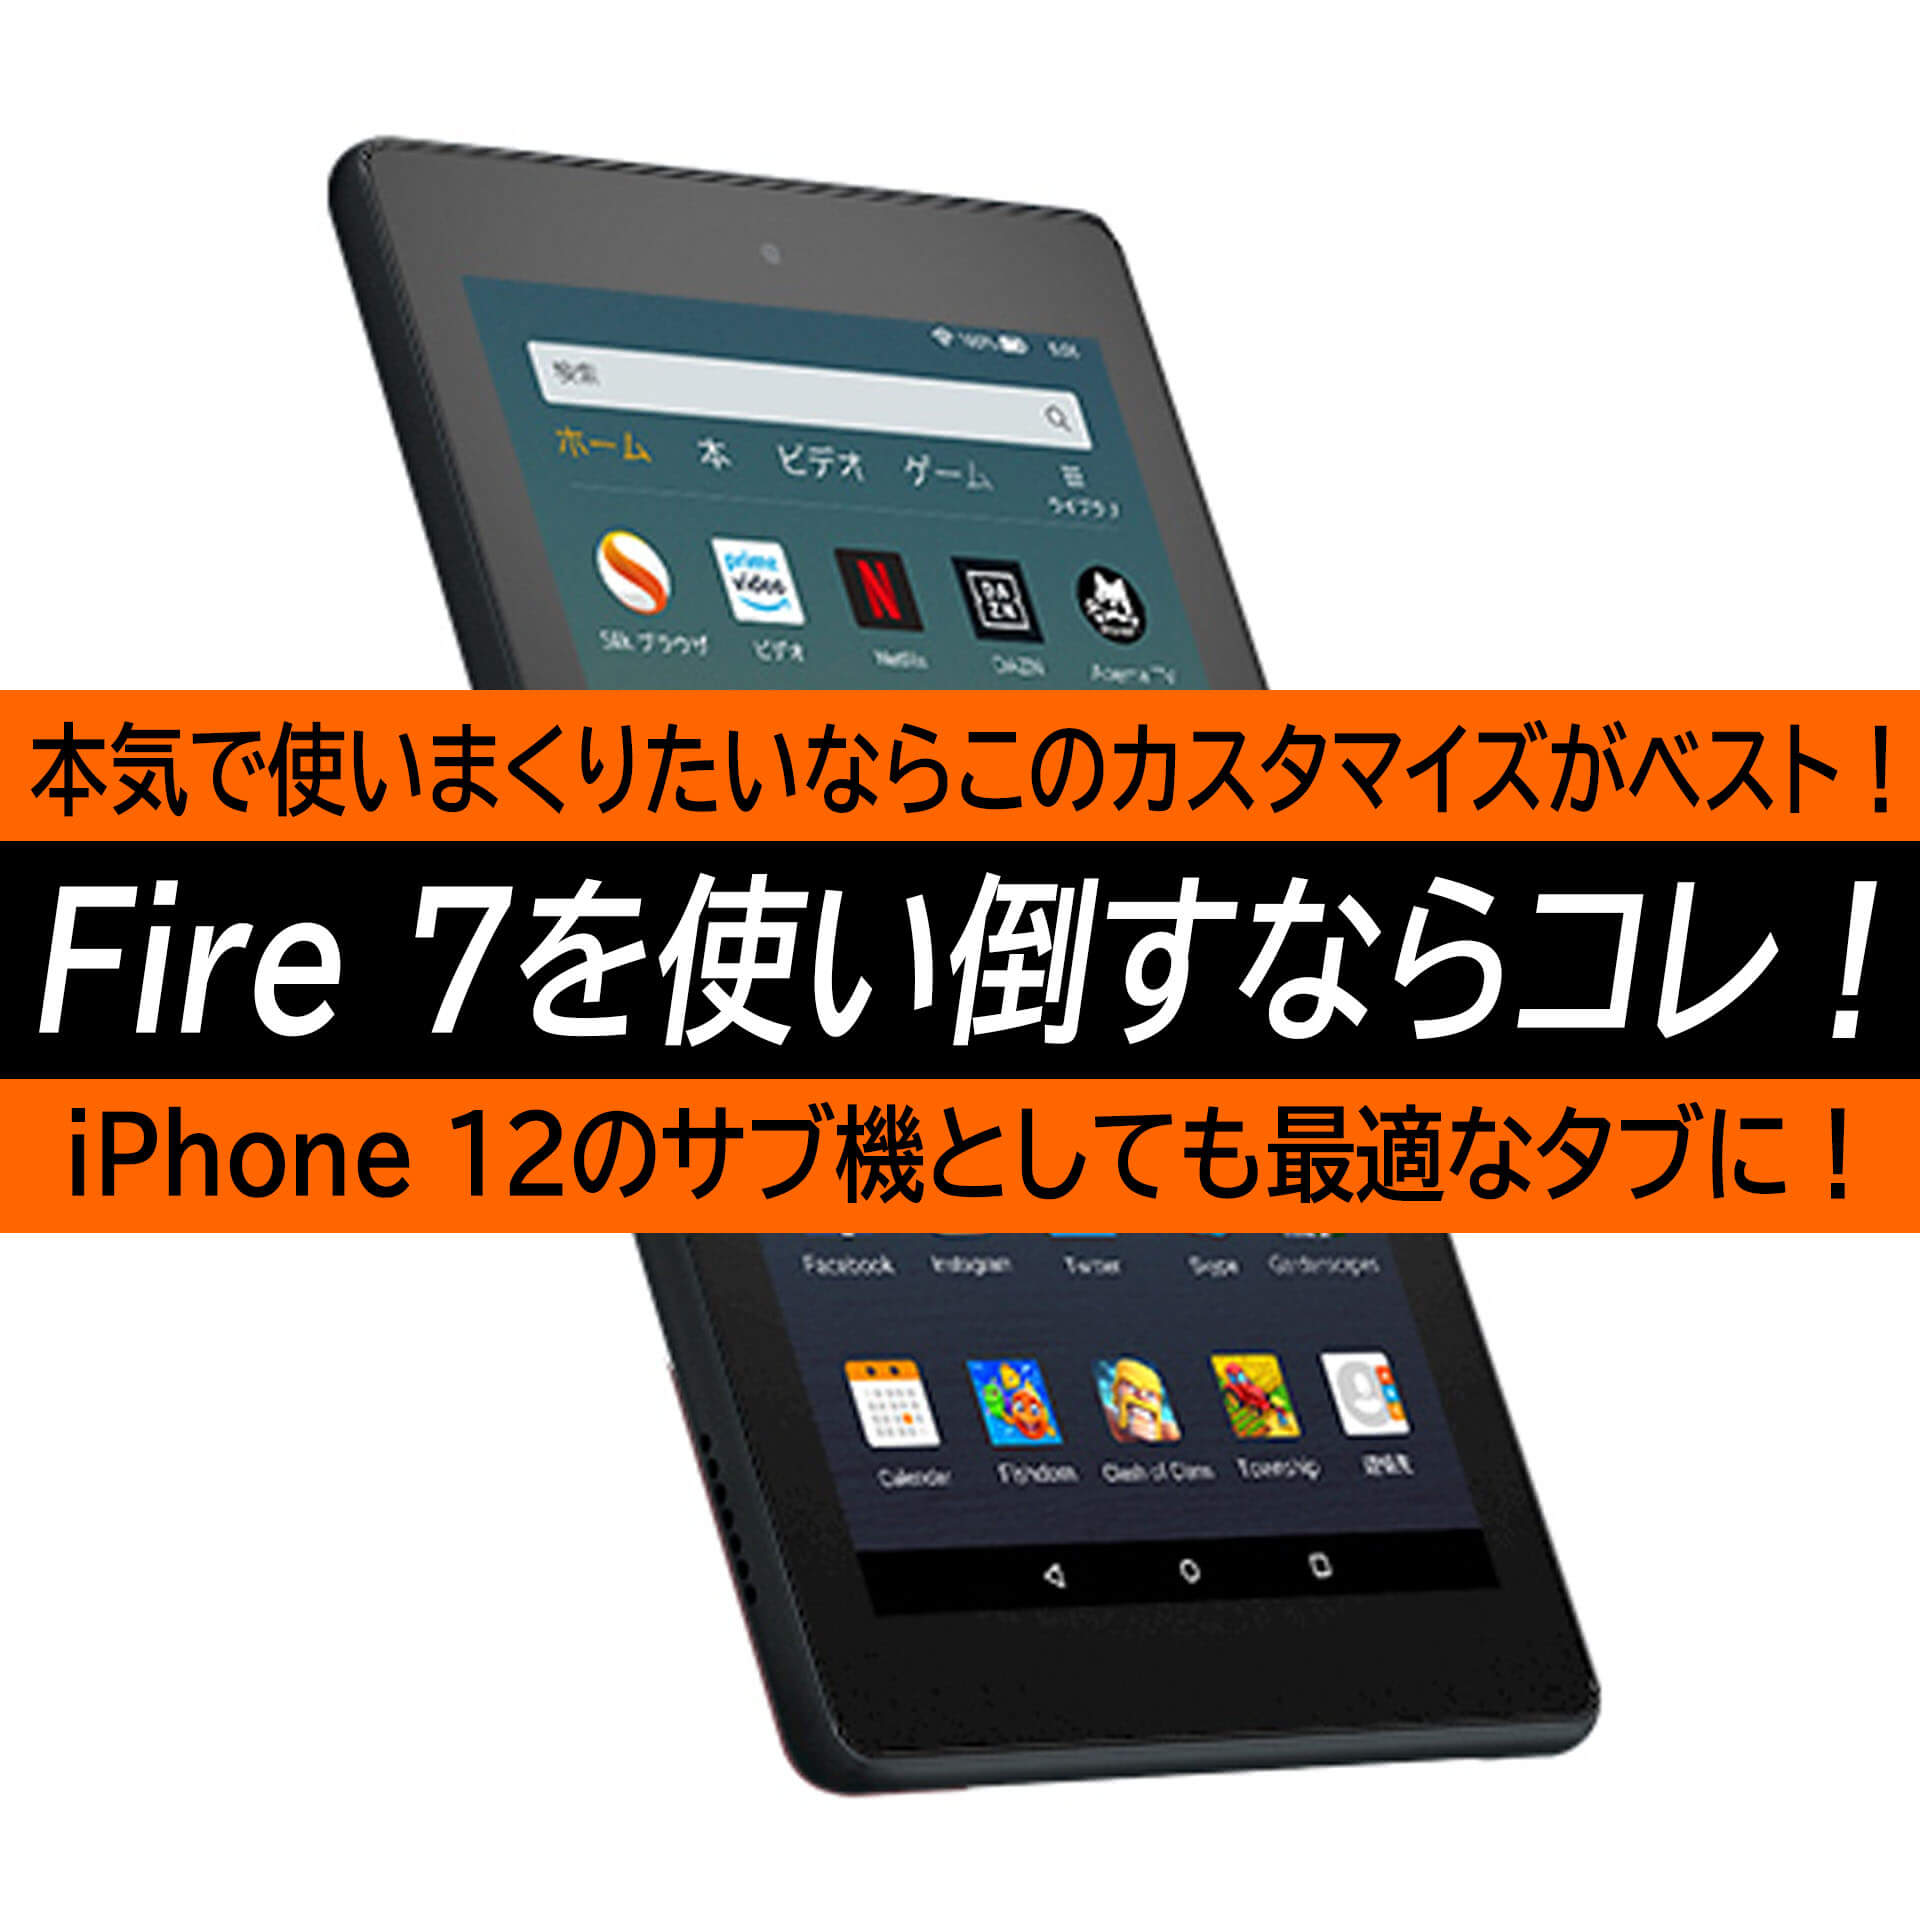 Fire タブレット 壁紙 1578 Fire タブレット 壁紙 横画面